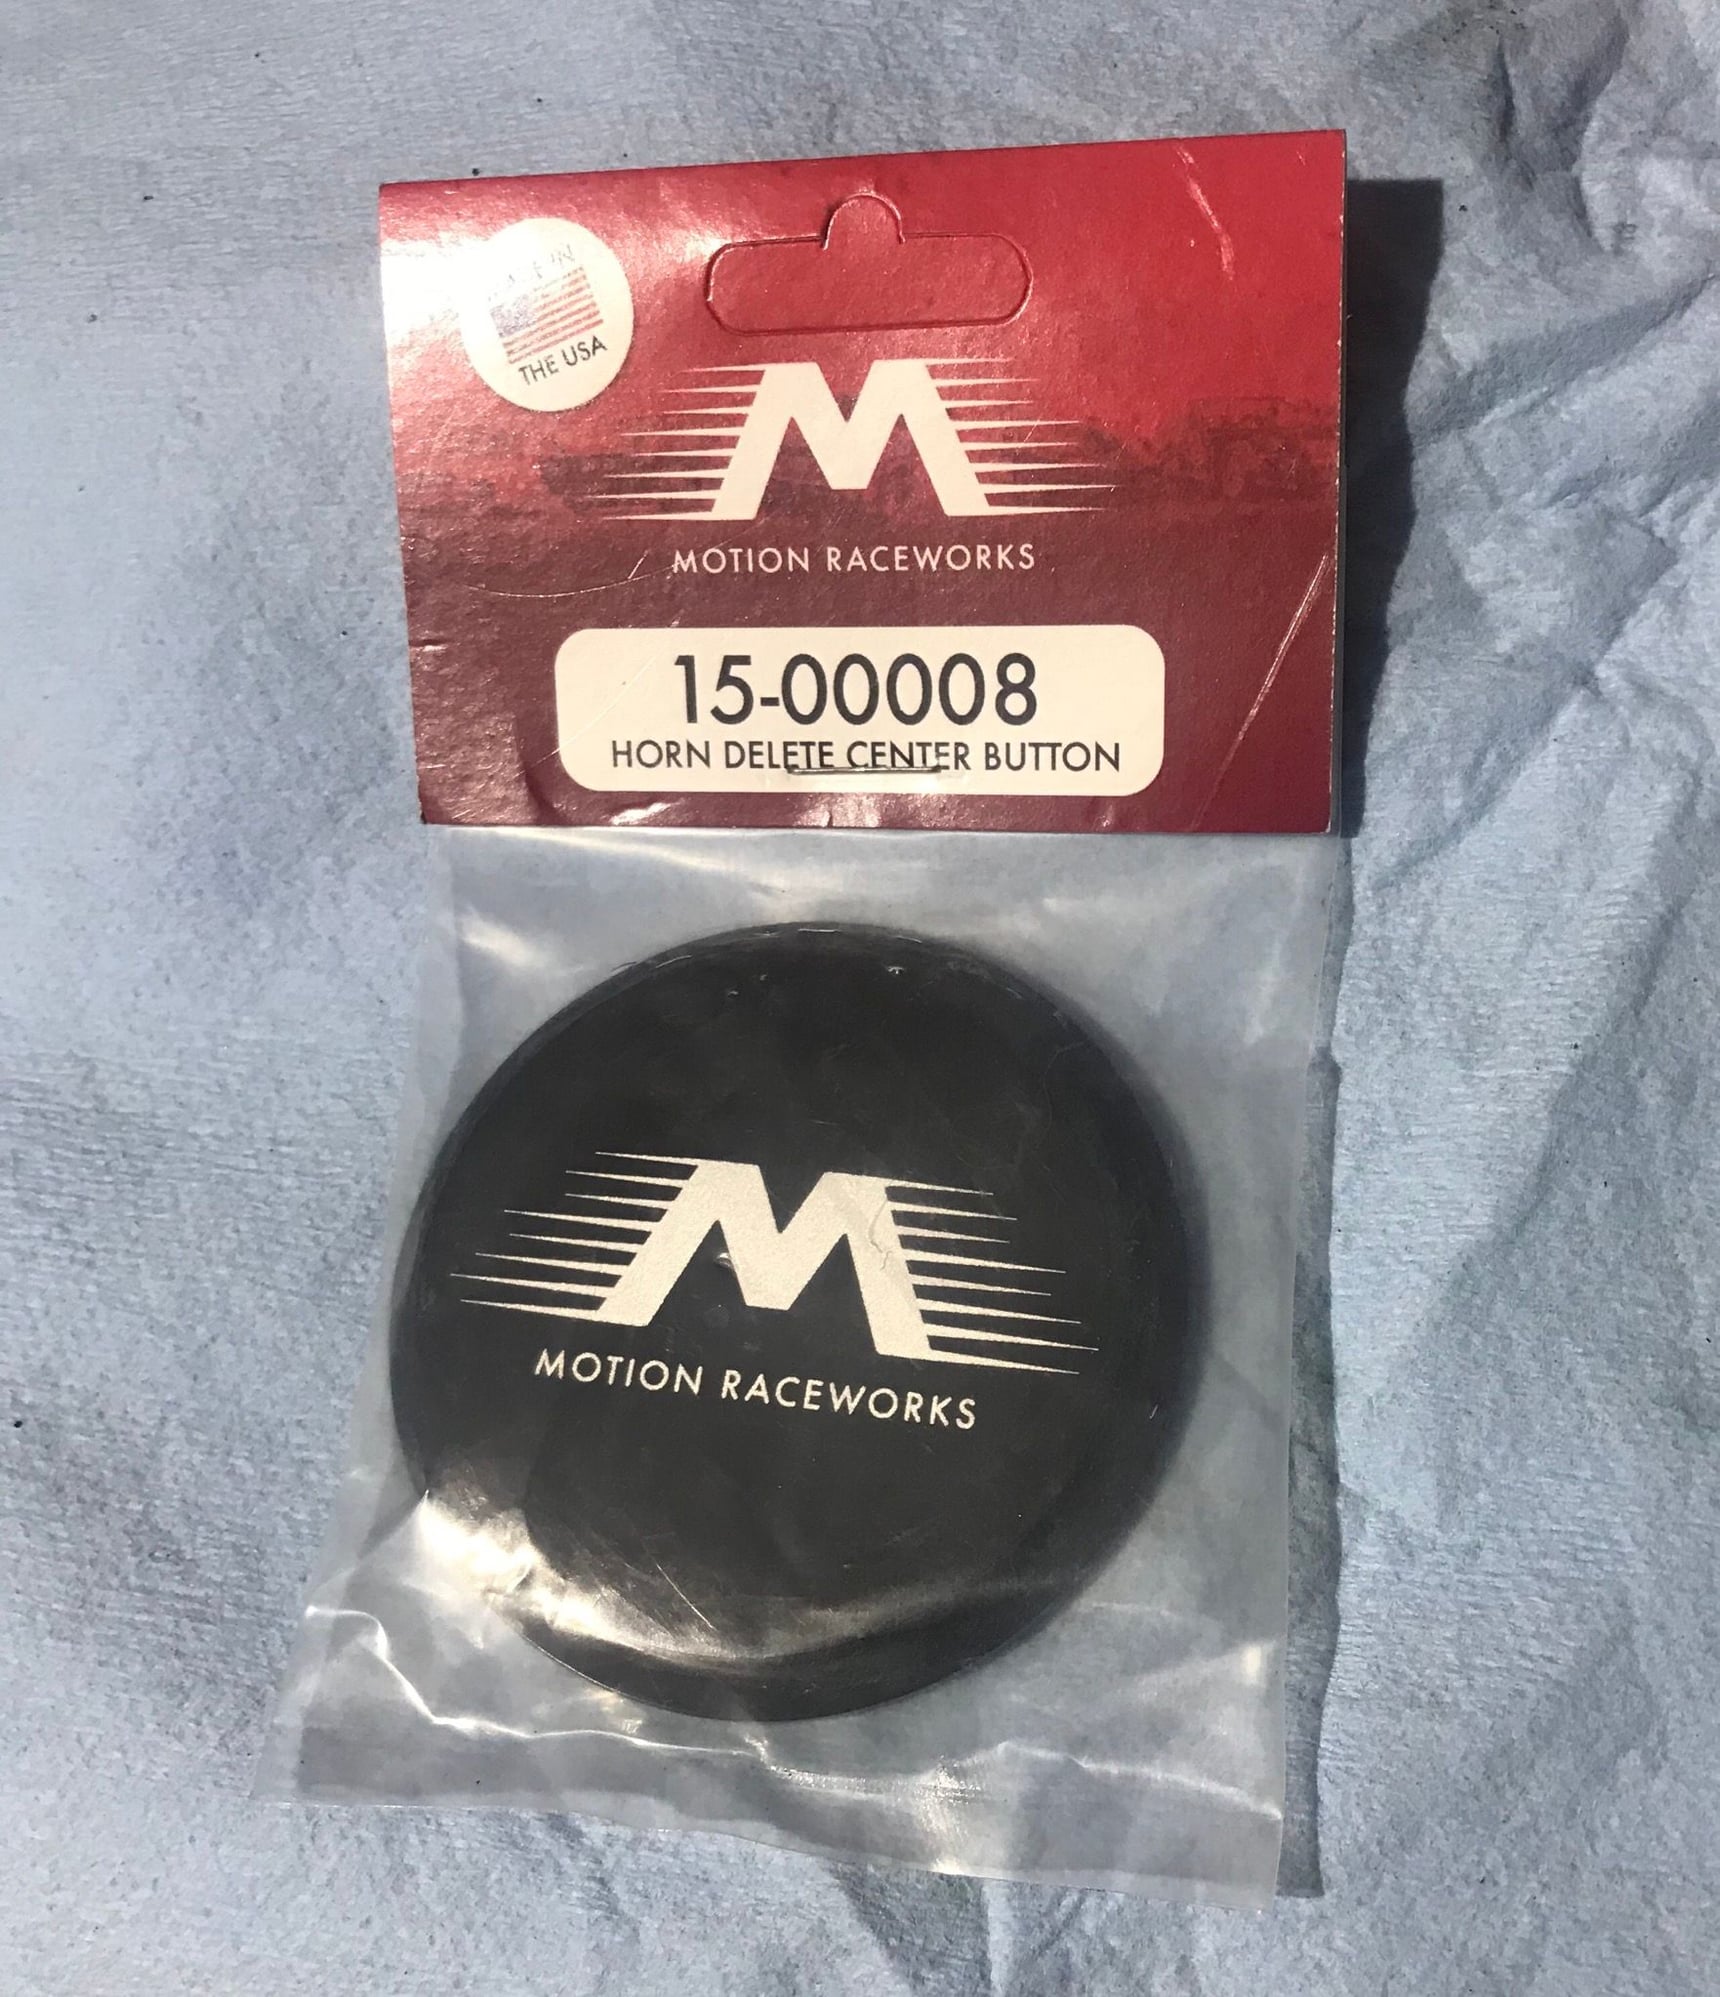 Miscellaneous - ID1700x injectors, ARP, parts, PRICE DROP! - Used - 0  All Models - St. Petersburg, FL 33714, United States